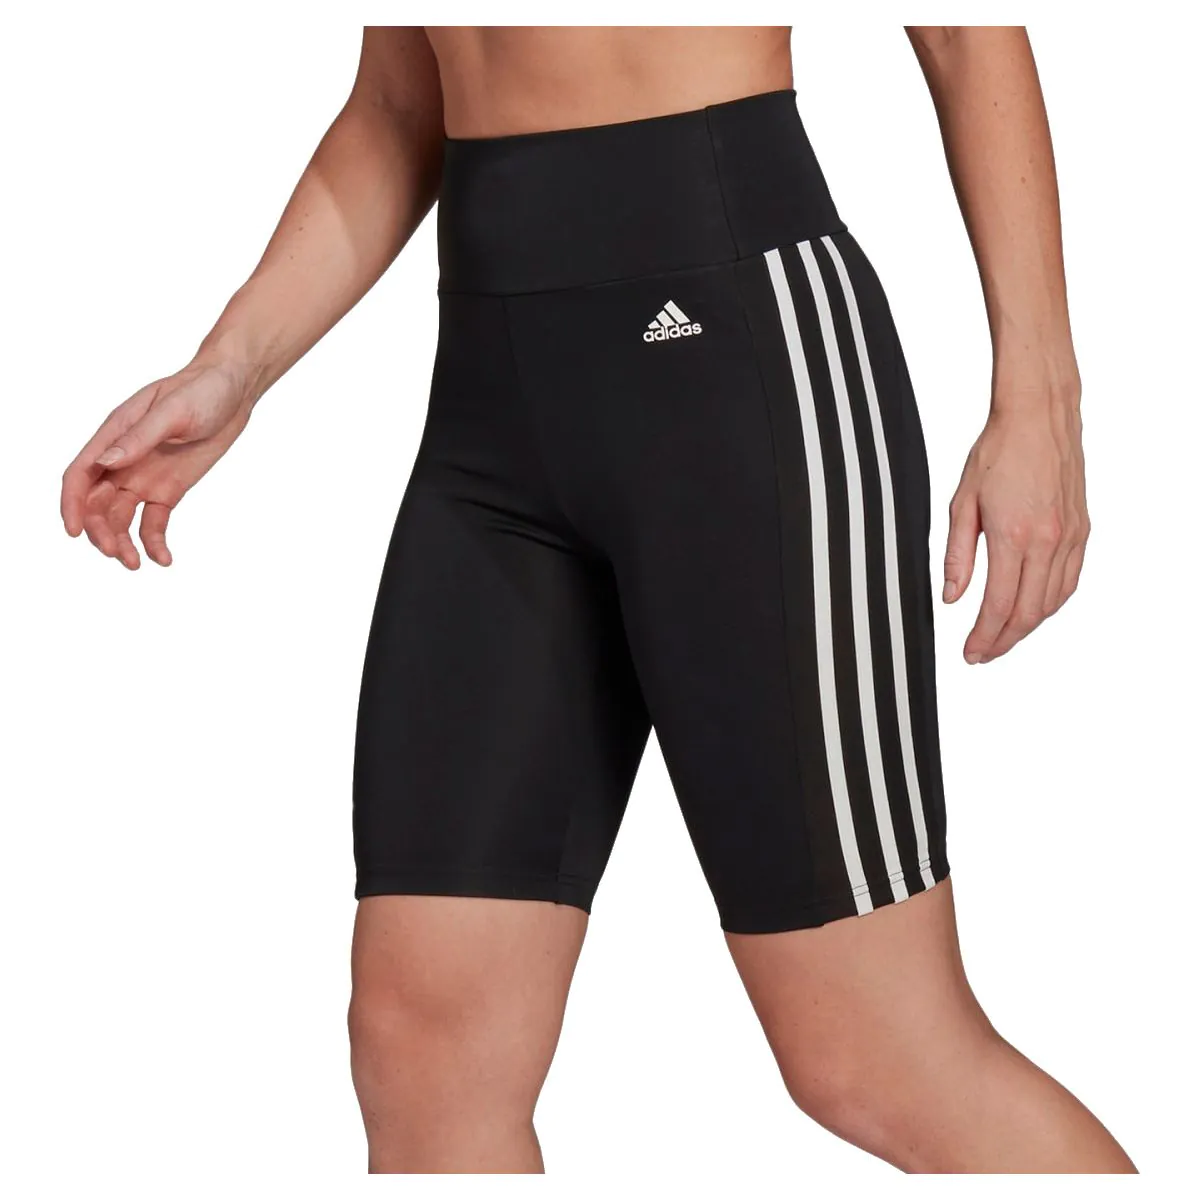 adidas Designed 2 Move High Rise Short Sport Women's Tights